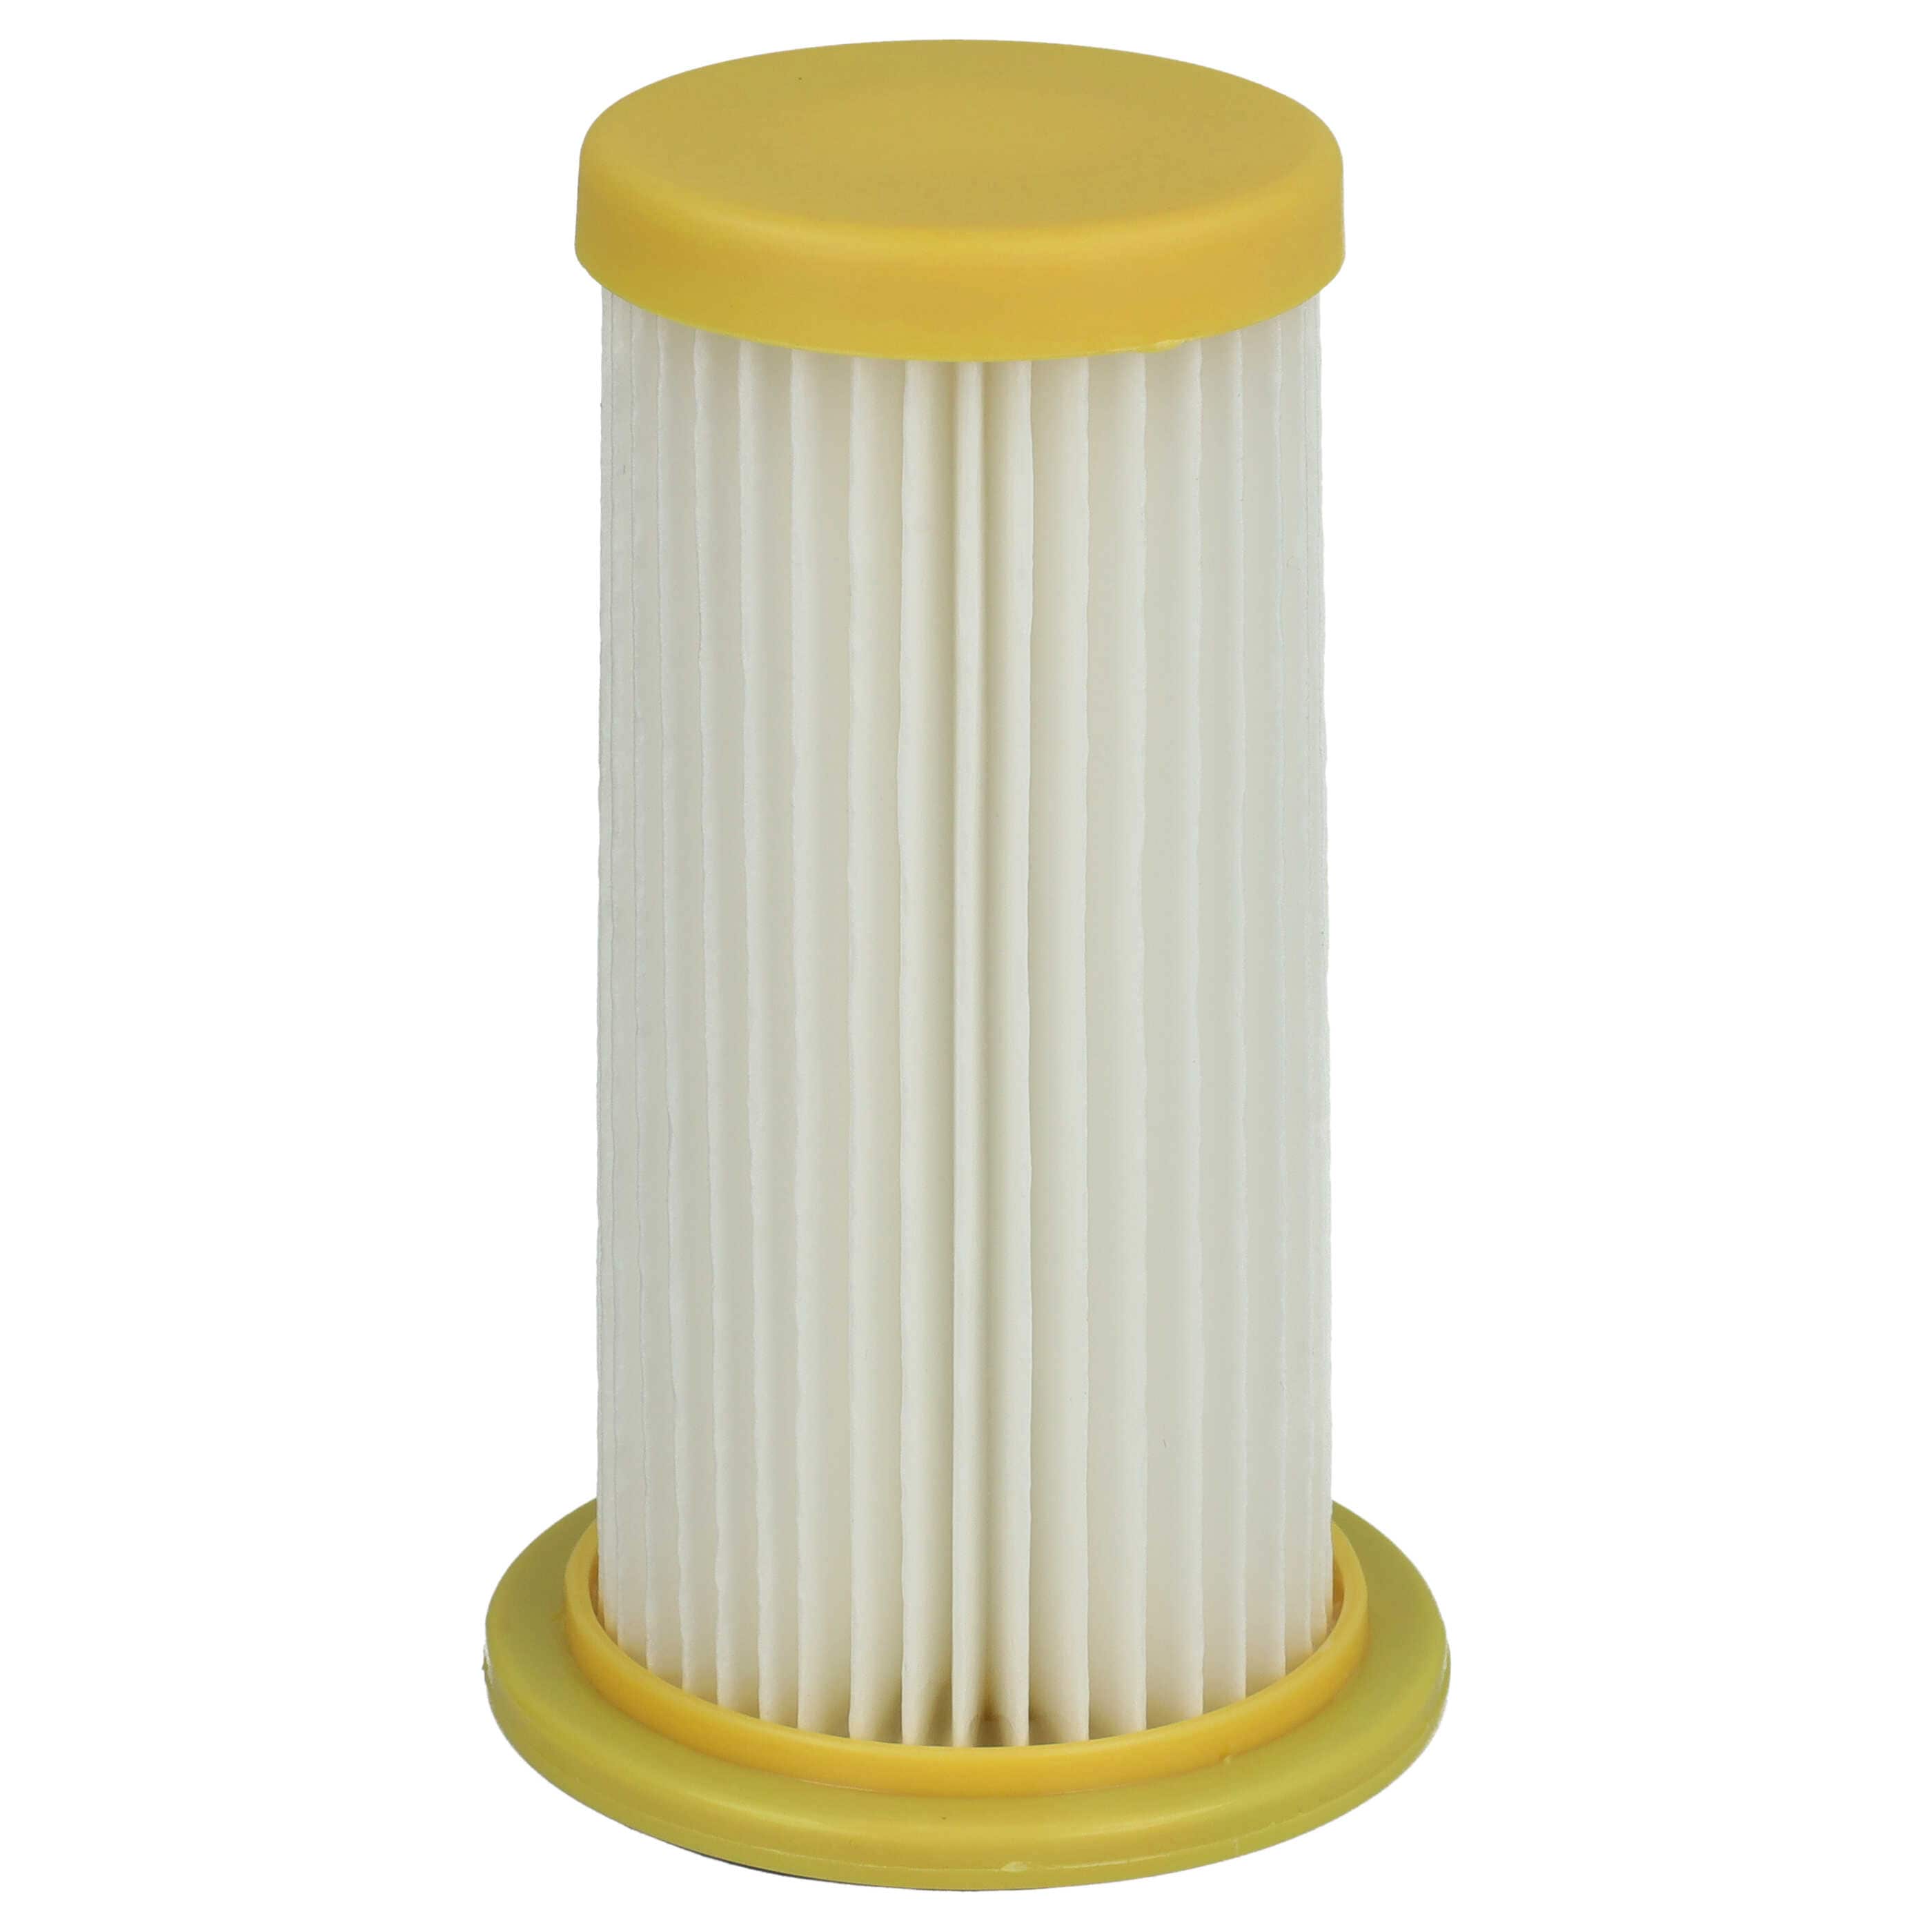 1x cartridge filter replaces Philips 432200520850 for Philips Vacuum Cleaner, white / yellow